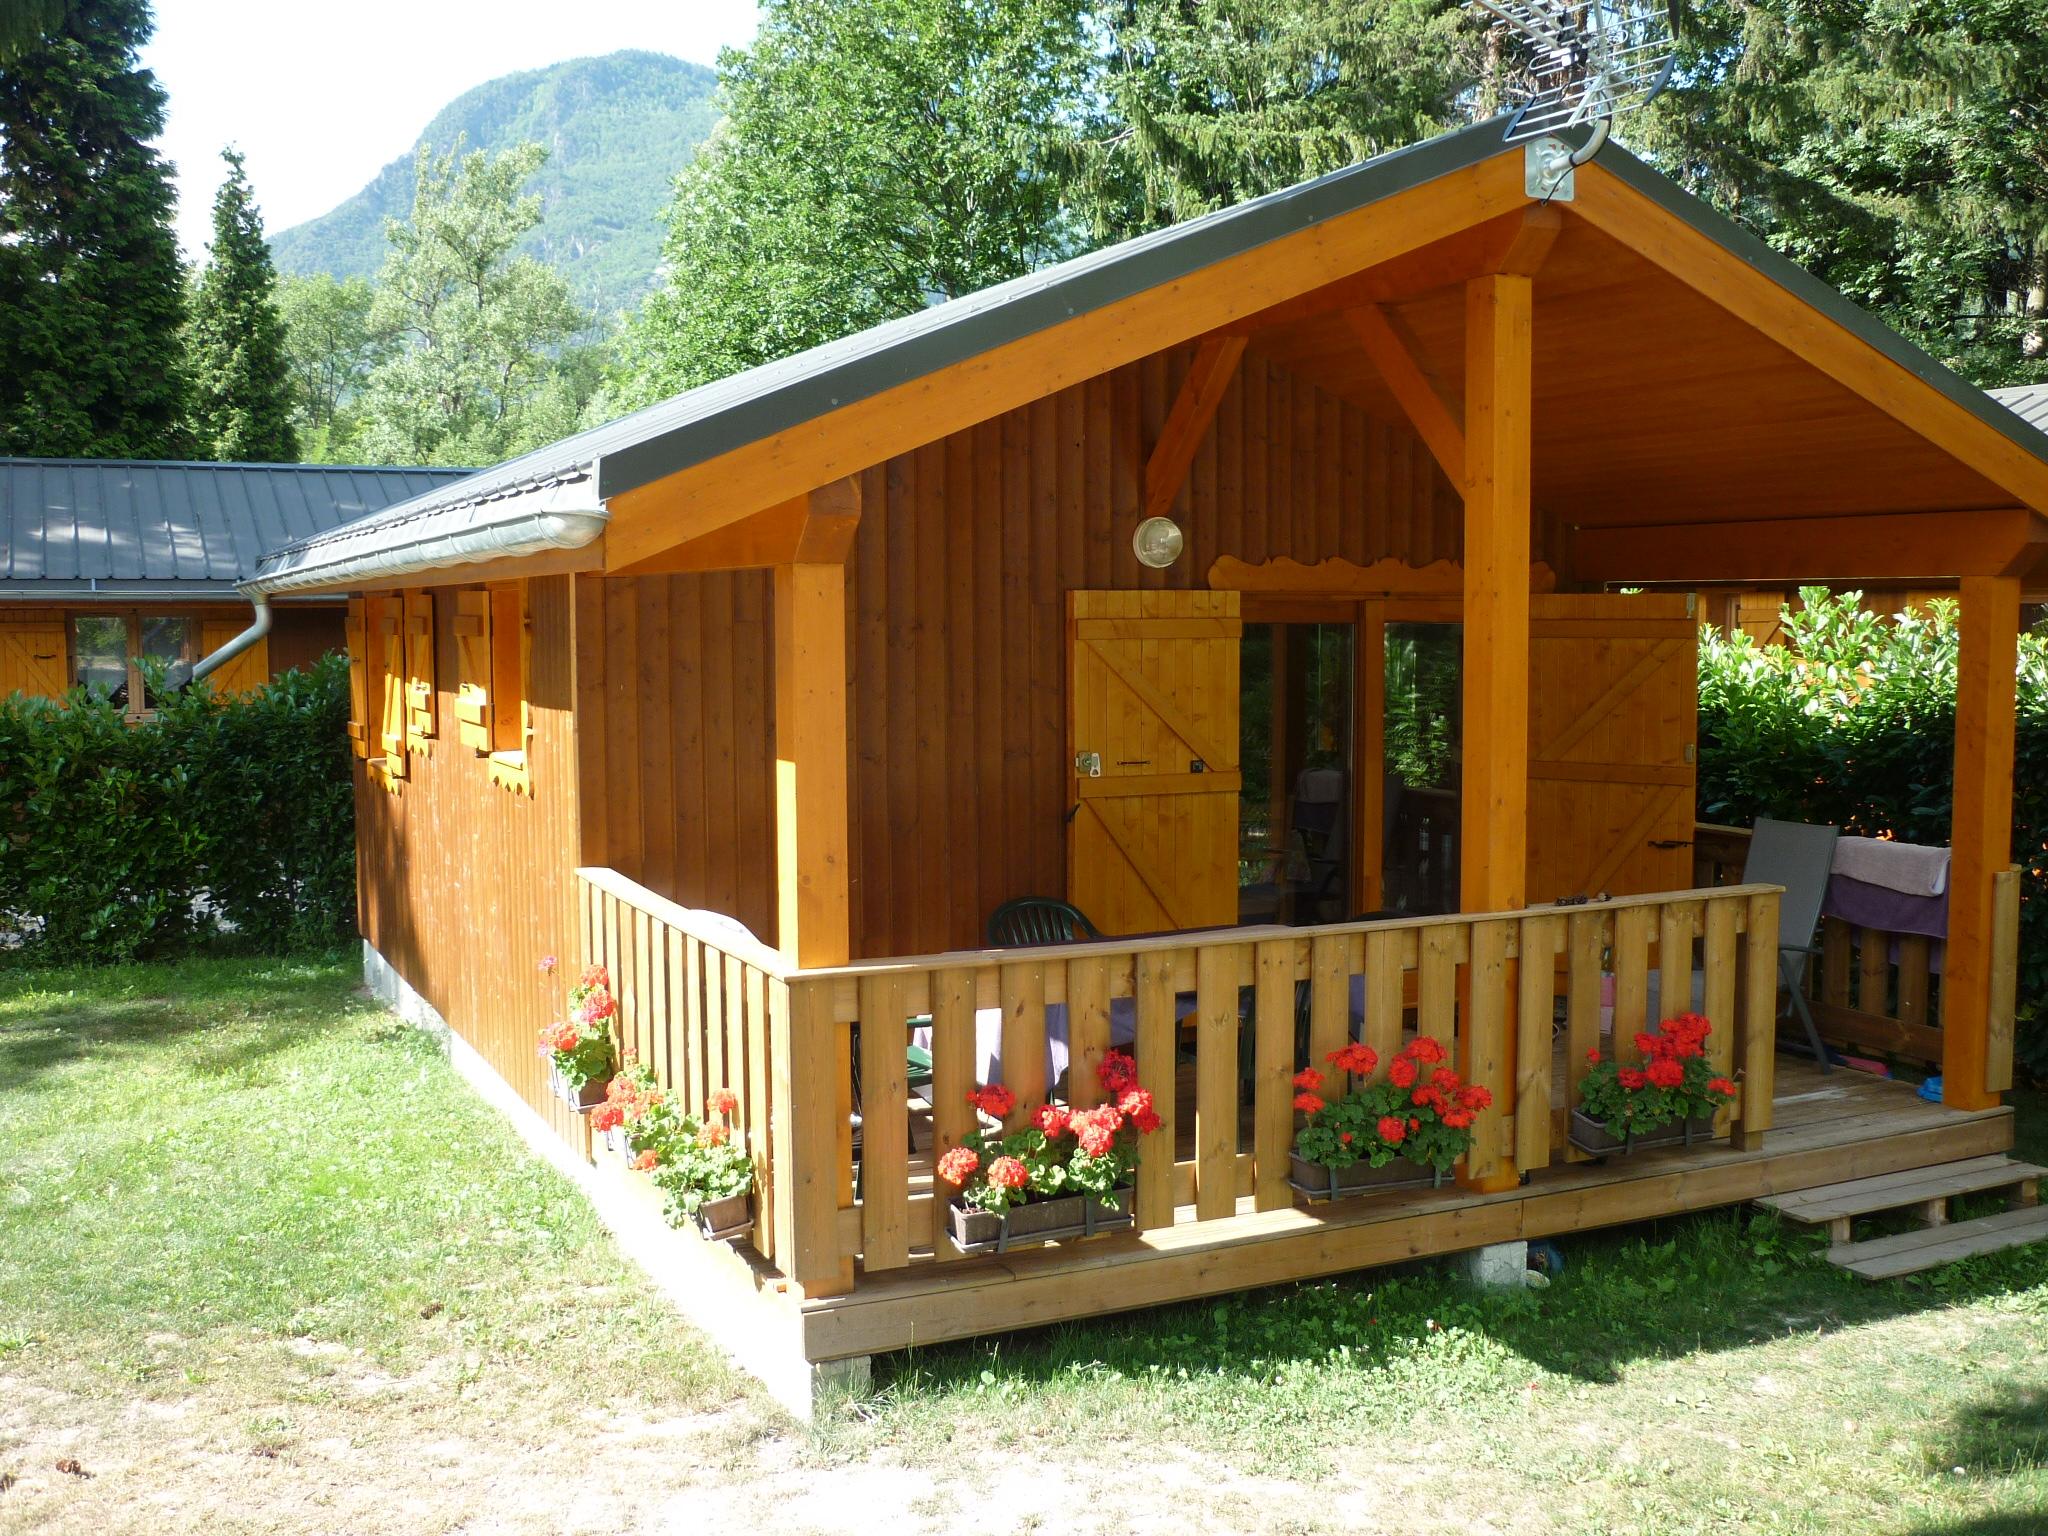 Huuraccommodatie - Chalet - Camping des Neiges